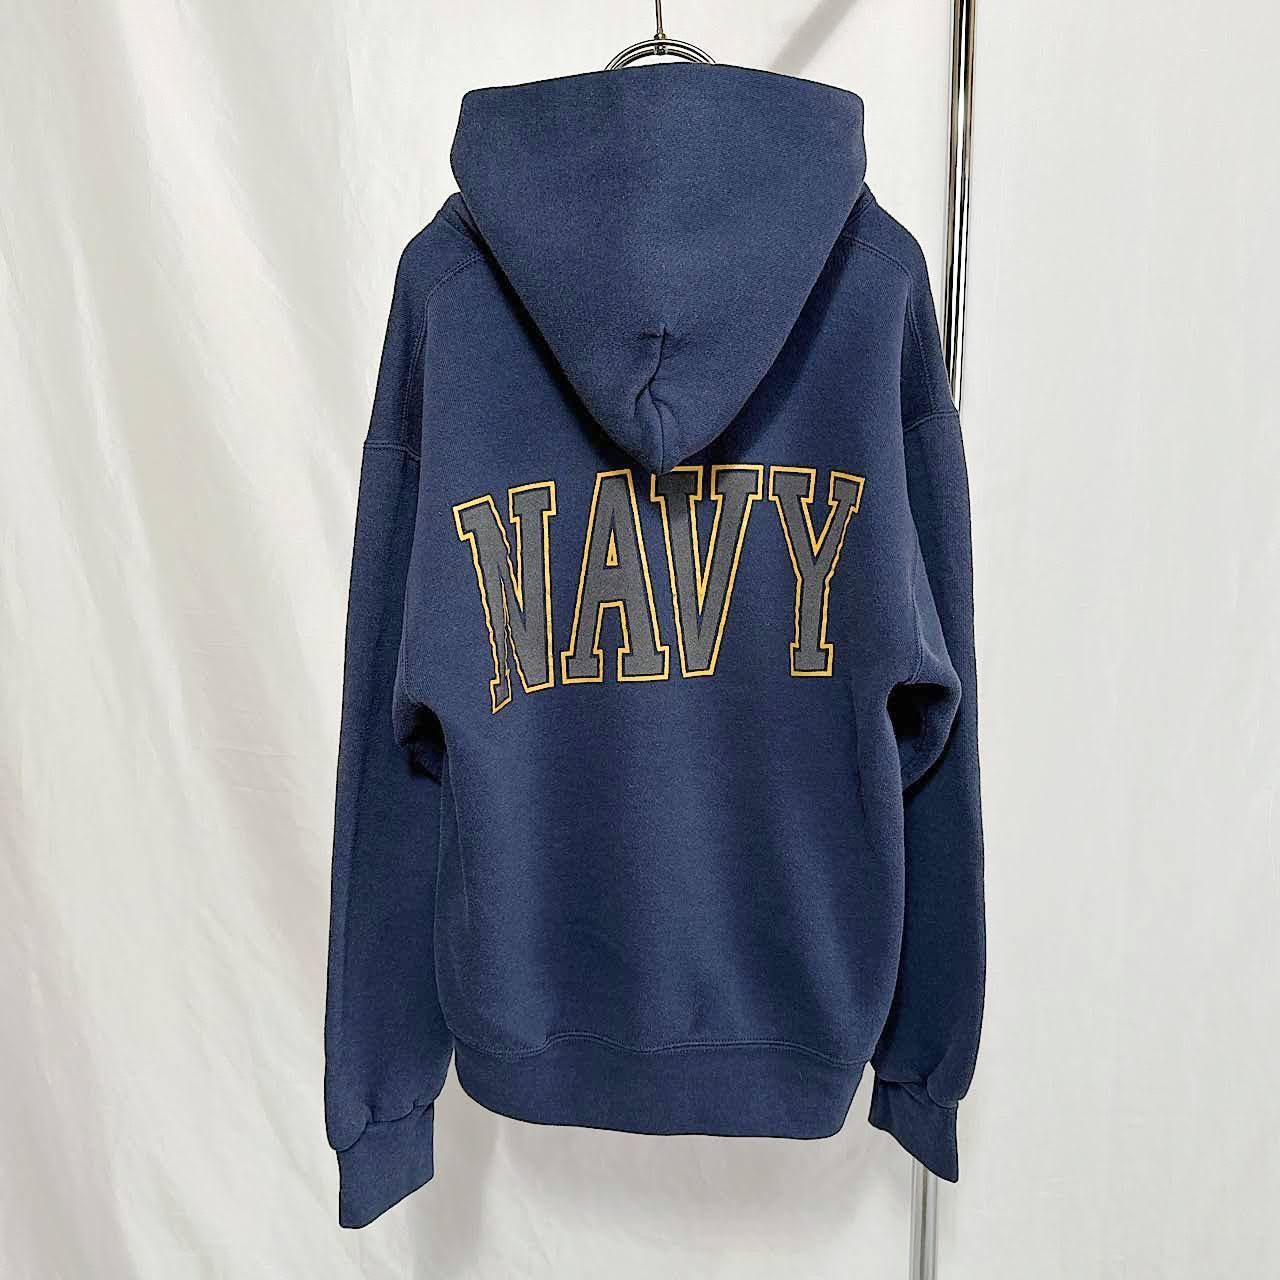 90s USA製 size：S U.S.NAVY 両面プリント スウェット パーカー 古着